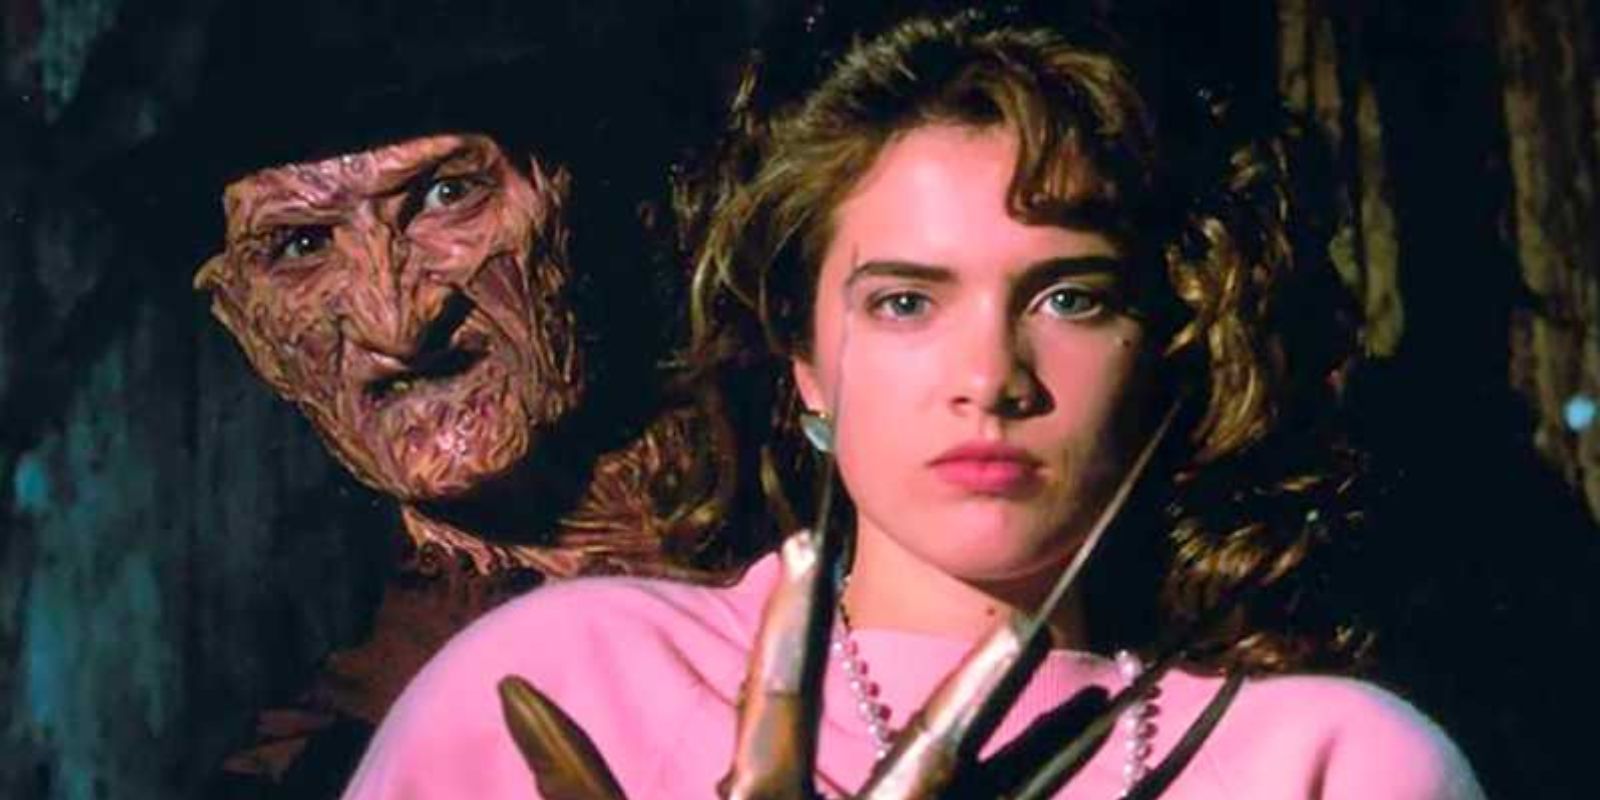 Nancy Thompson with Freddy Krueger looming in the background 